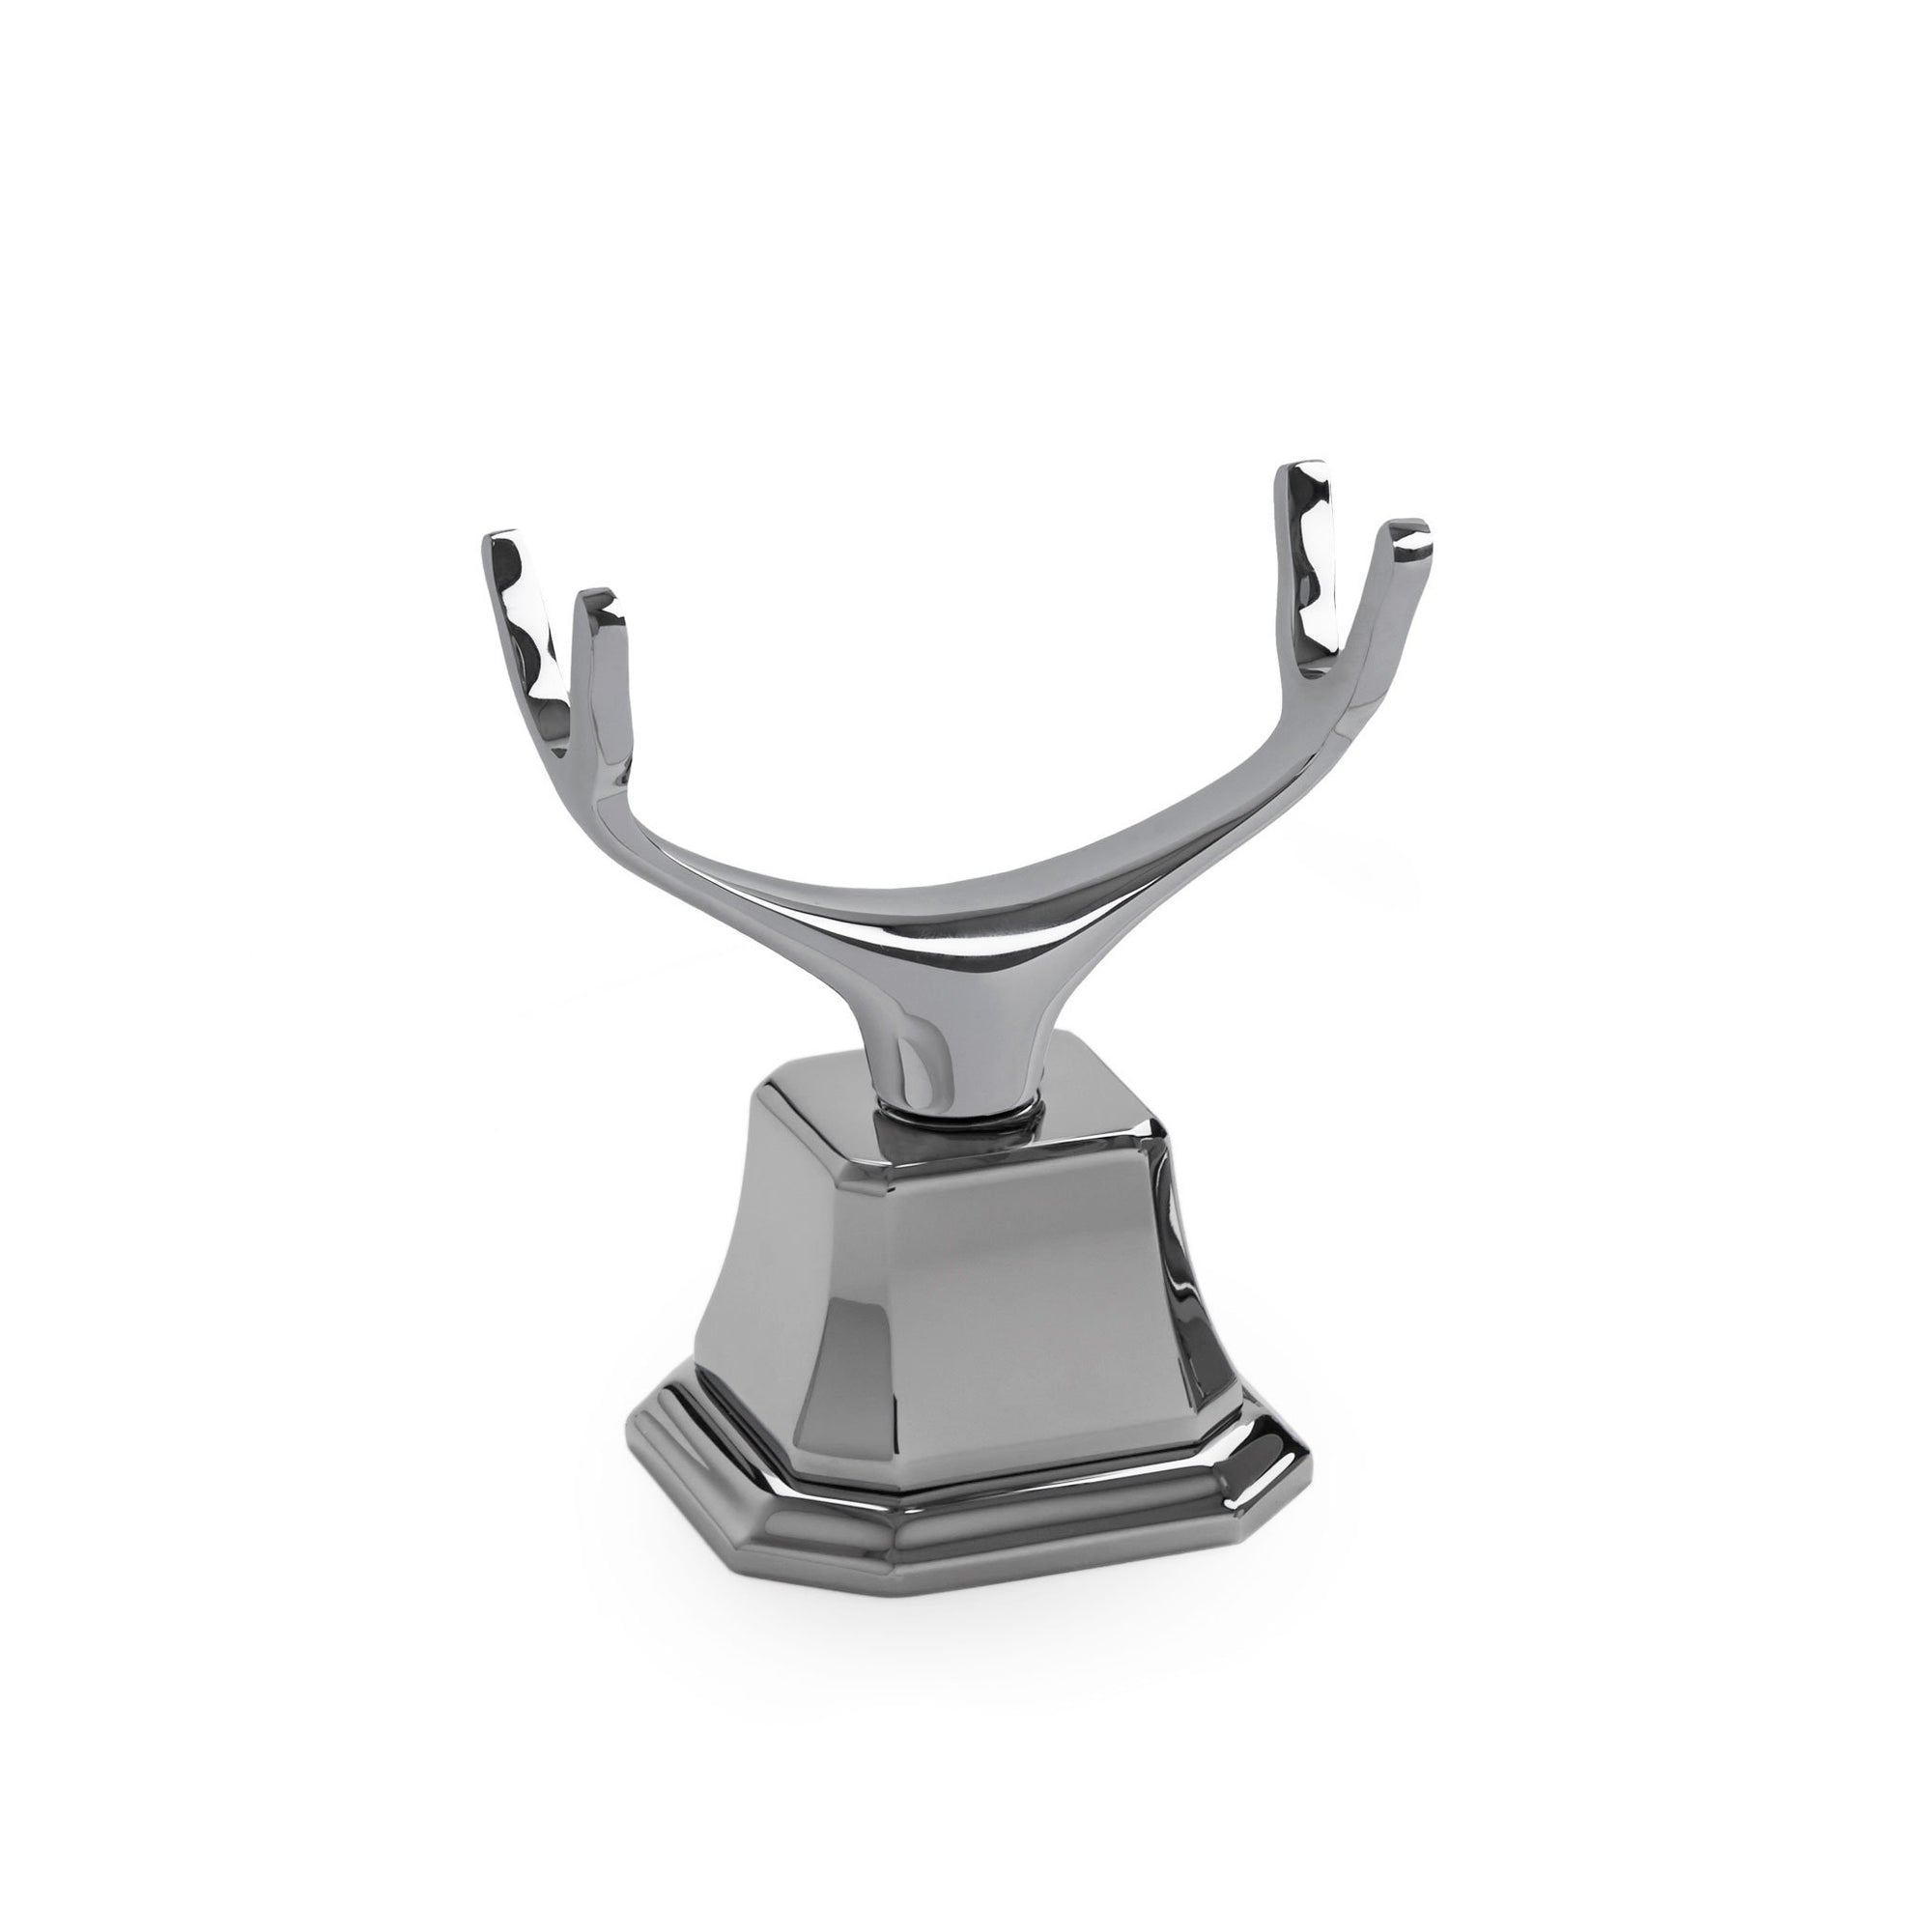 0849DKMT-HR-CP Sherle Wagner International Deck Mount Cradle with Harrison Escutcheon in Polished Chrome metal finish